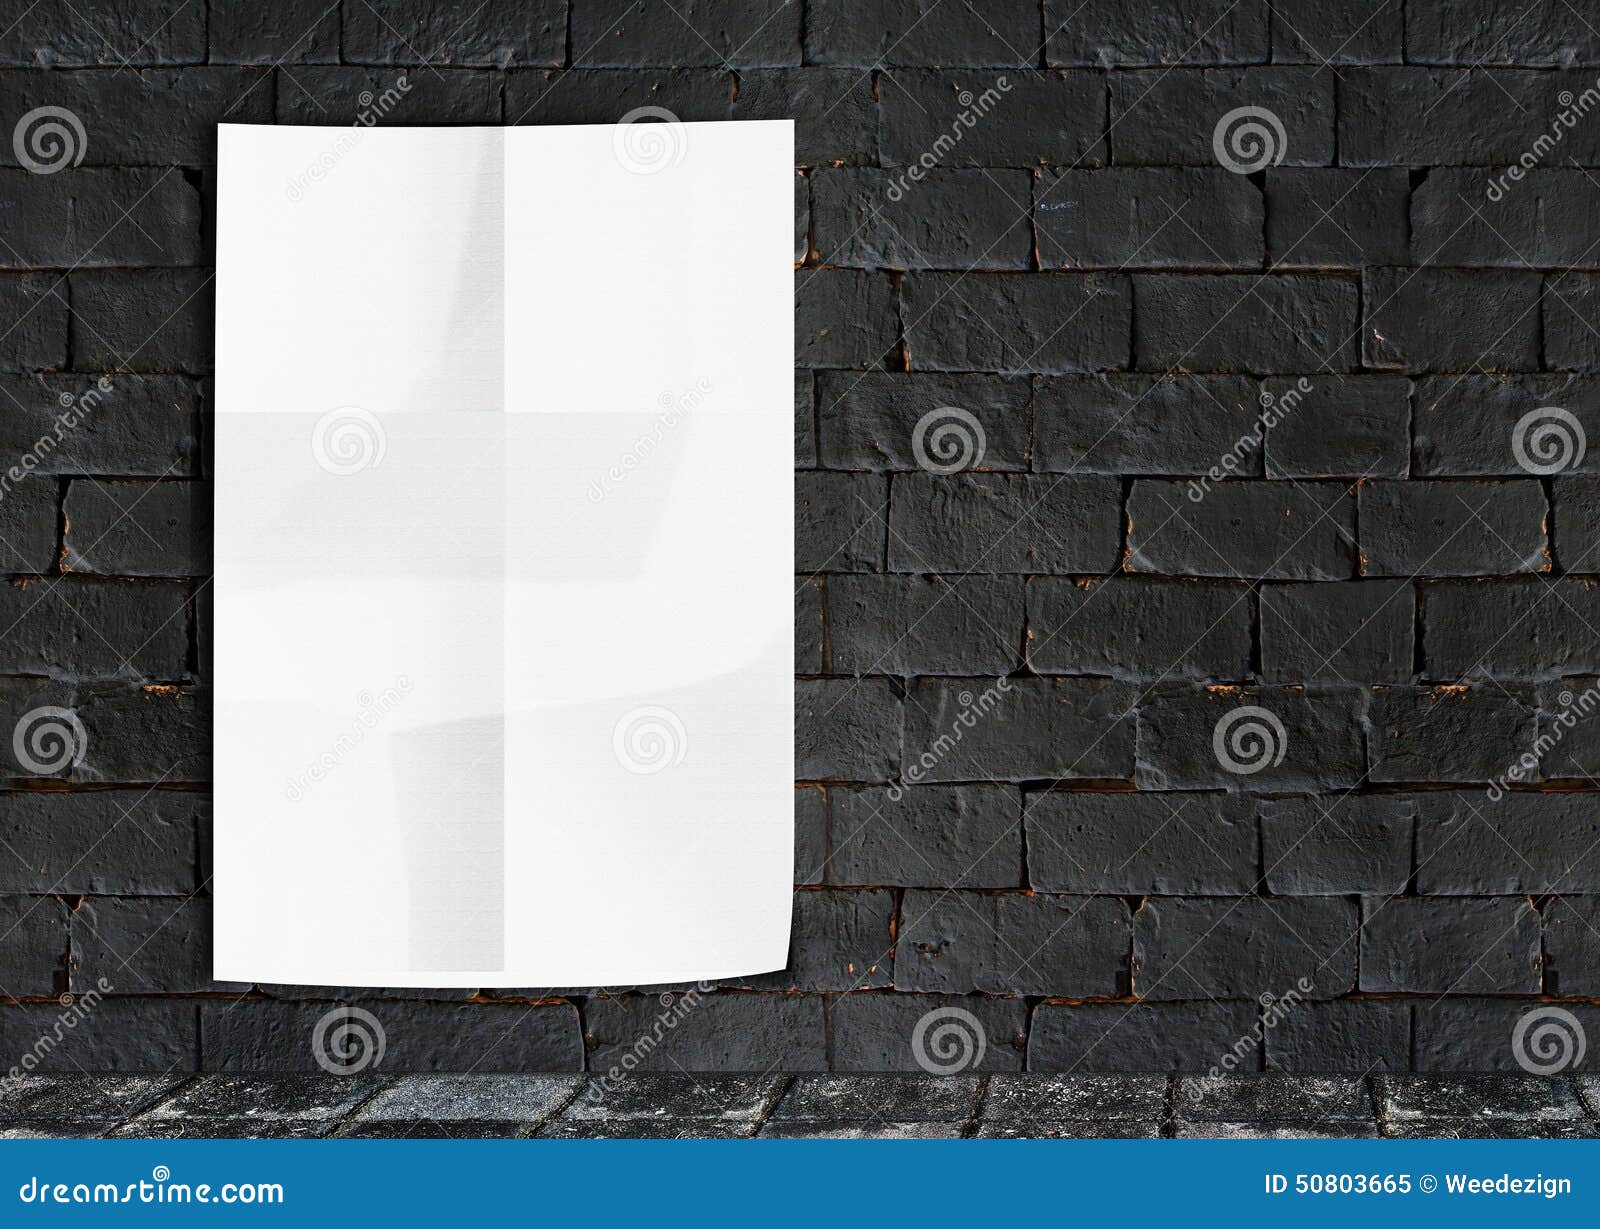 template- white crumple poster on grunge brick wall & footpath g